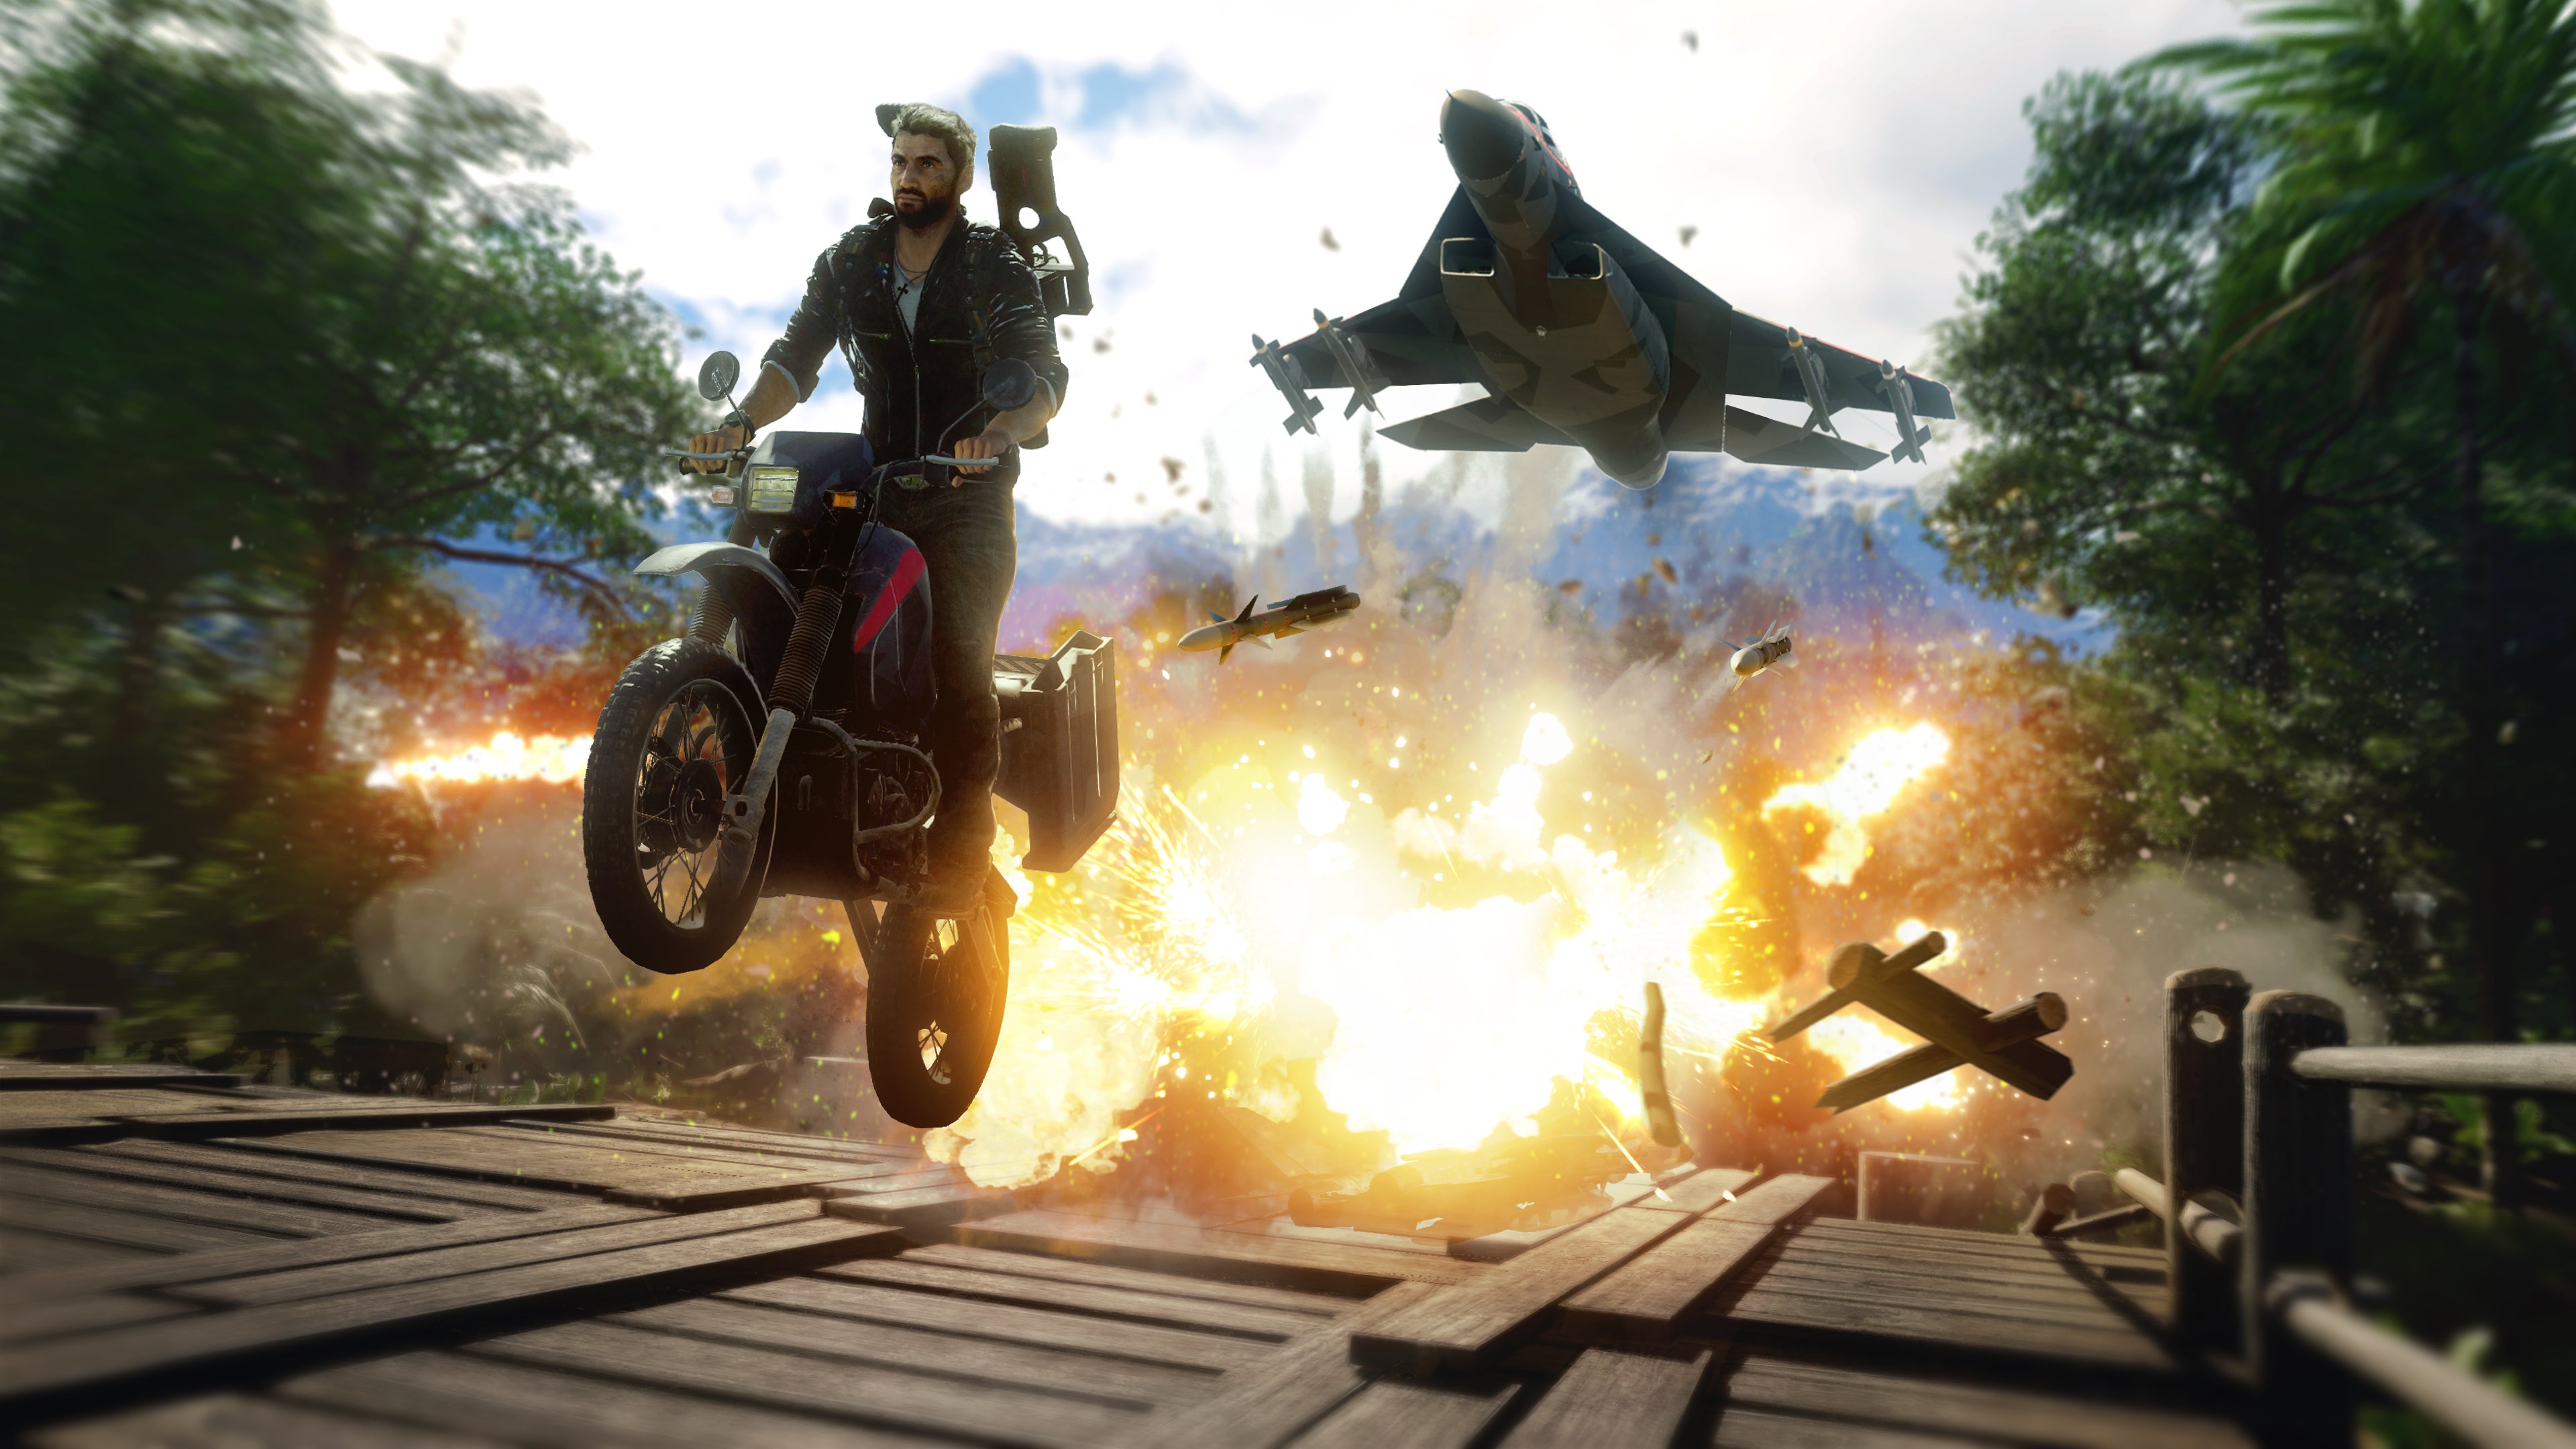 Image for Just Cause 4 is real, features huge explosions